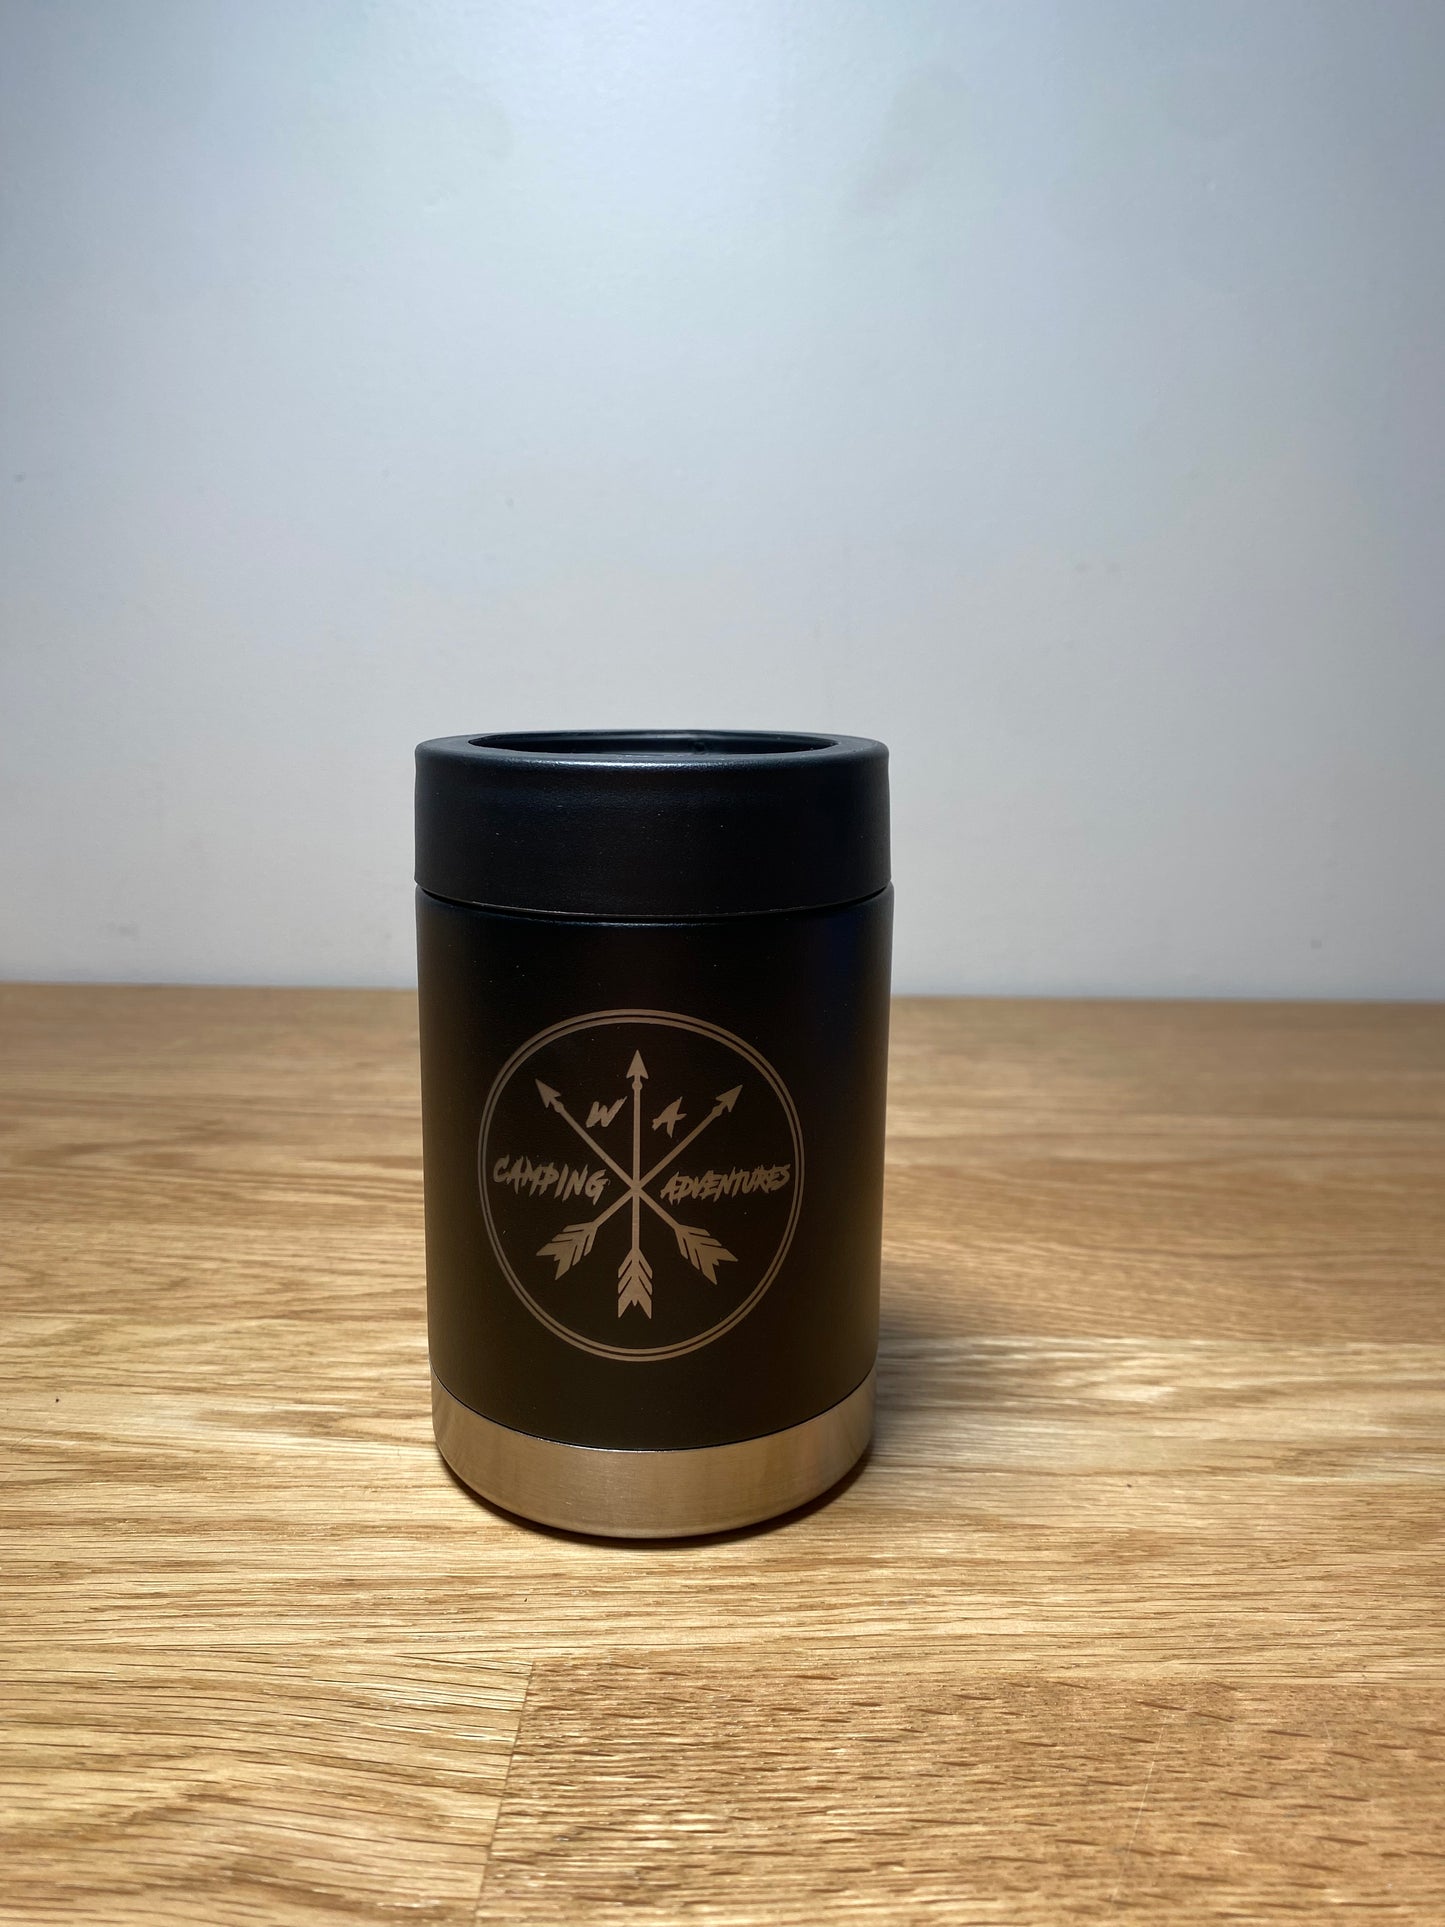 WACA 330ml stub-skey can cooler / whiskey cup